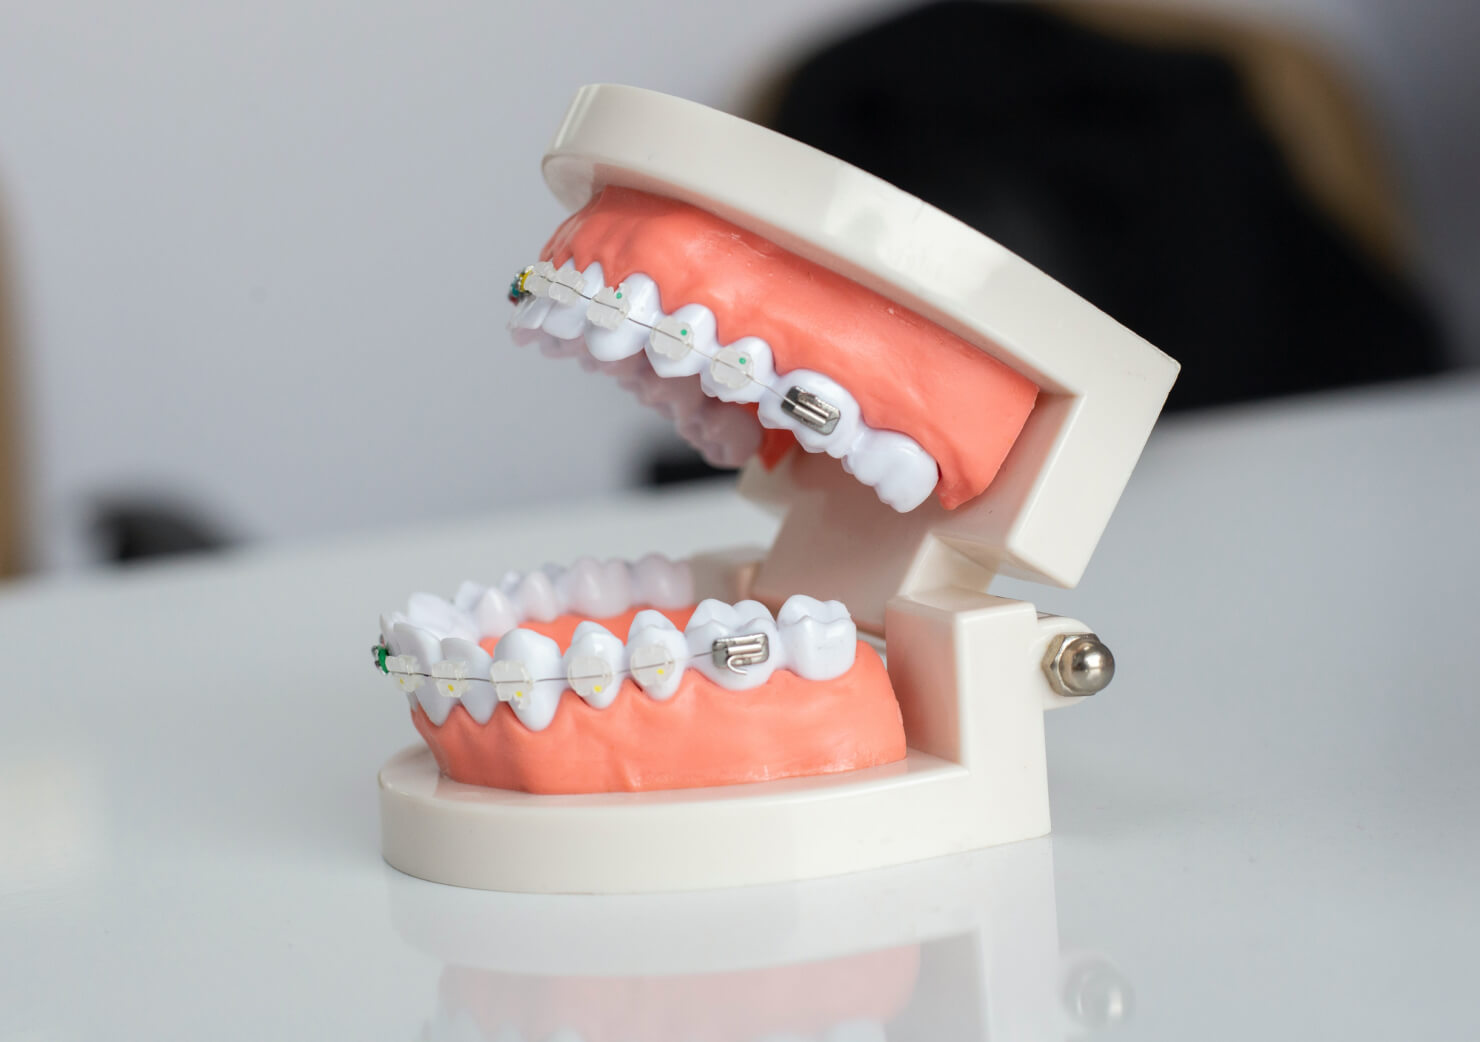 How to Have Great Oral Hygiene with Braces